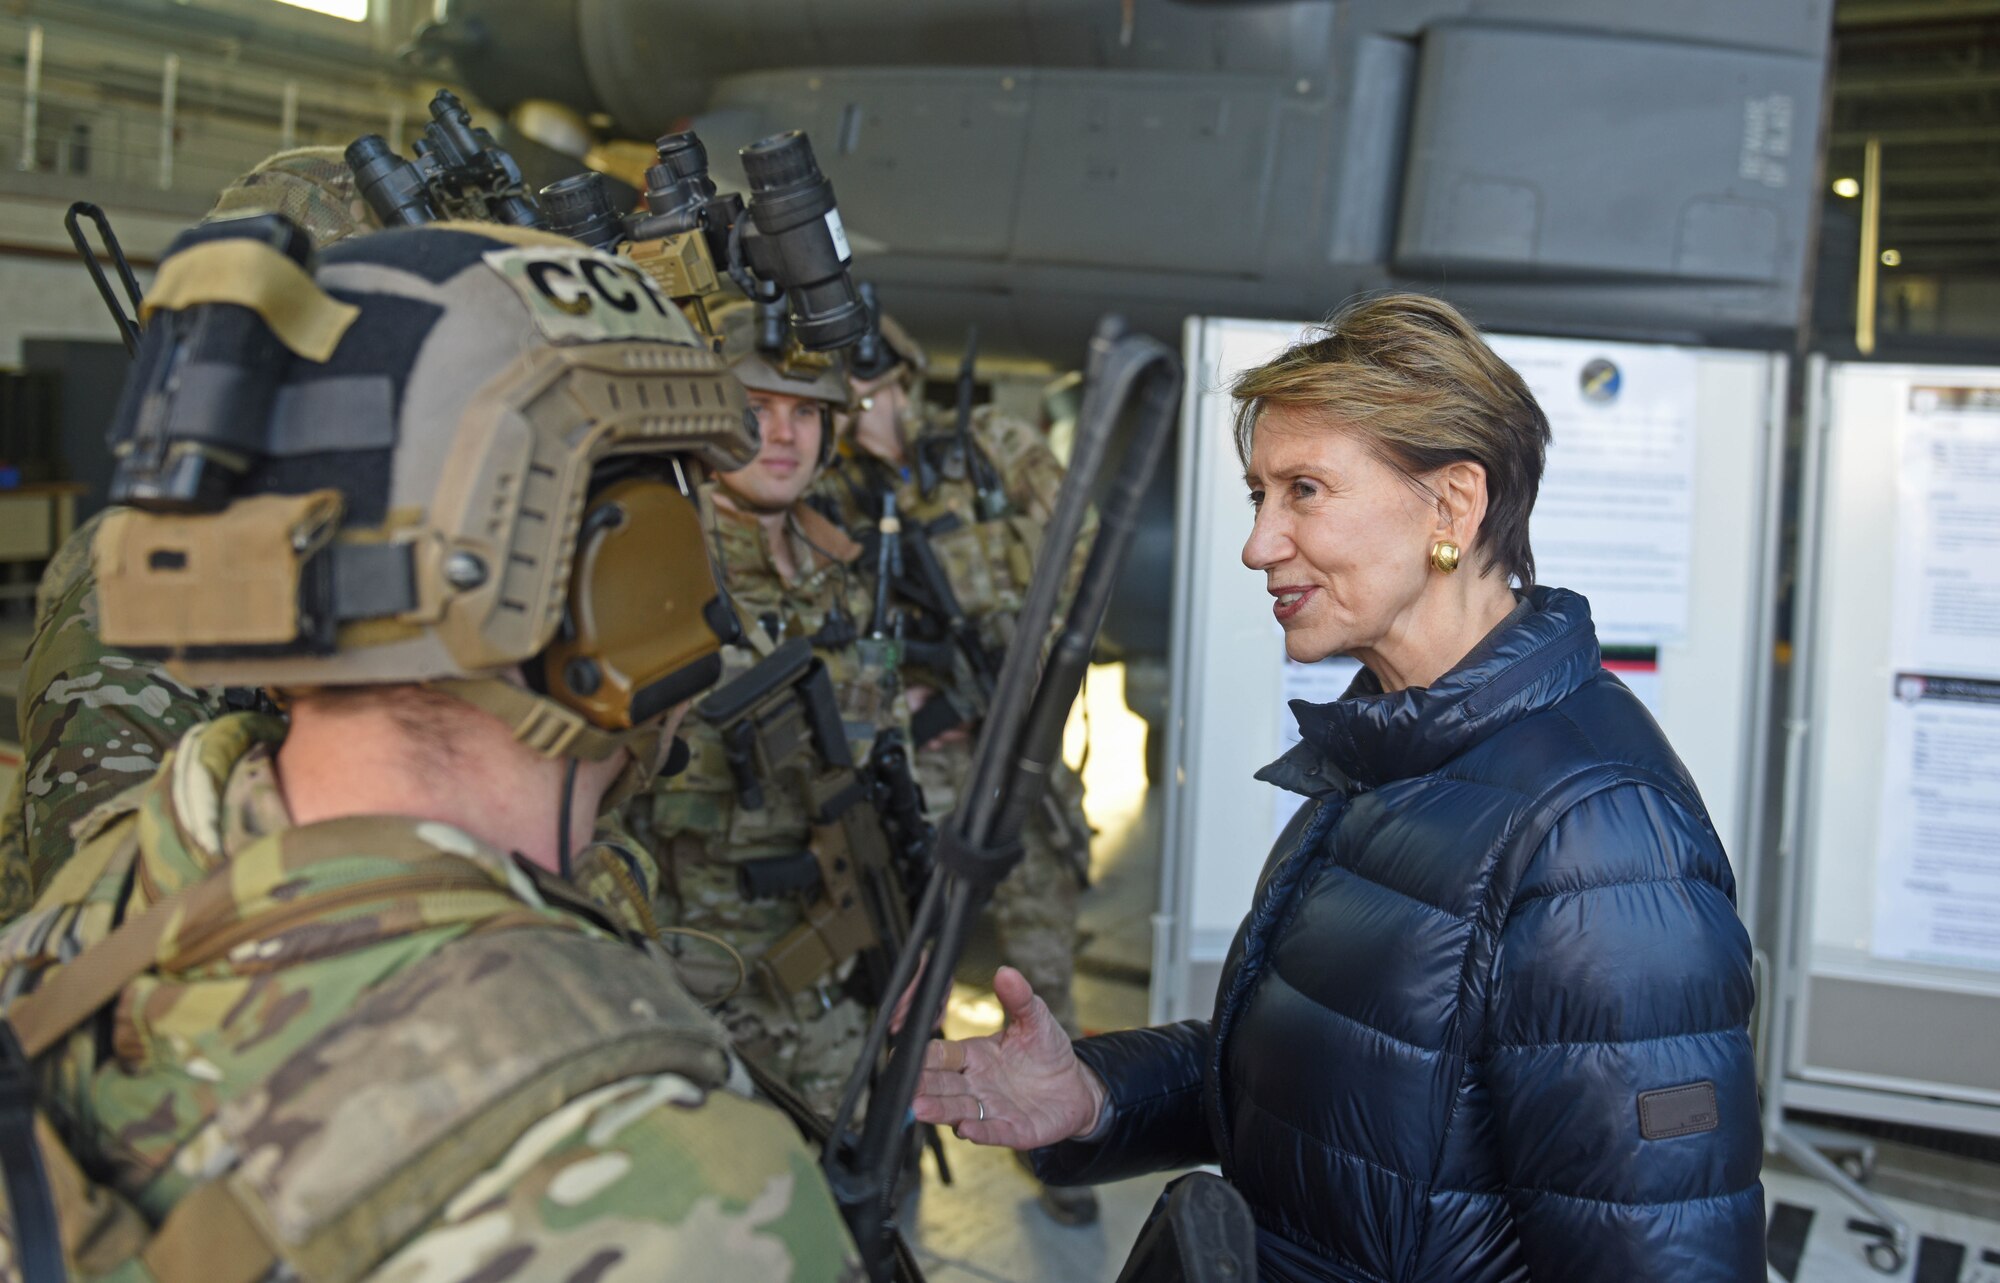 Secretary of the Air Force Barbara Barrett speaks with 352 Special Operations Wing air commandos during her visit to RAF Mildenhall, England, Feb. 13, 2020. During Barrett’s visit she stopped at various units including the air traffic control tower, fire station and different units within the 352 SOW. (U.S. Air Force photo by Staff Sgt. Luke Milano)